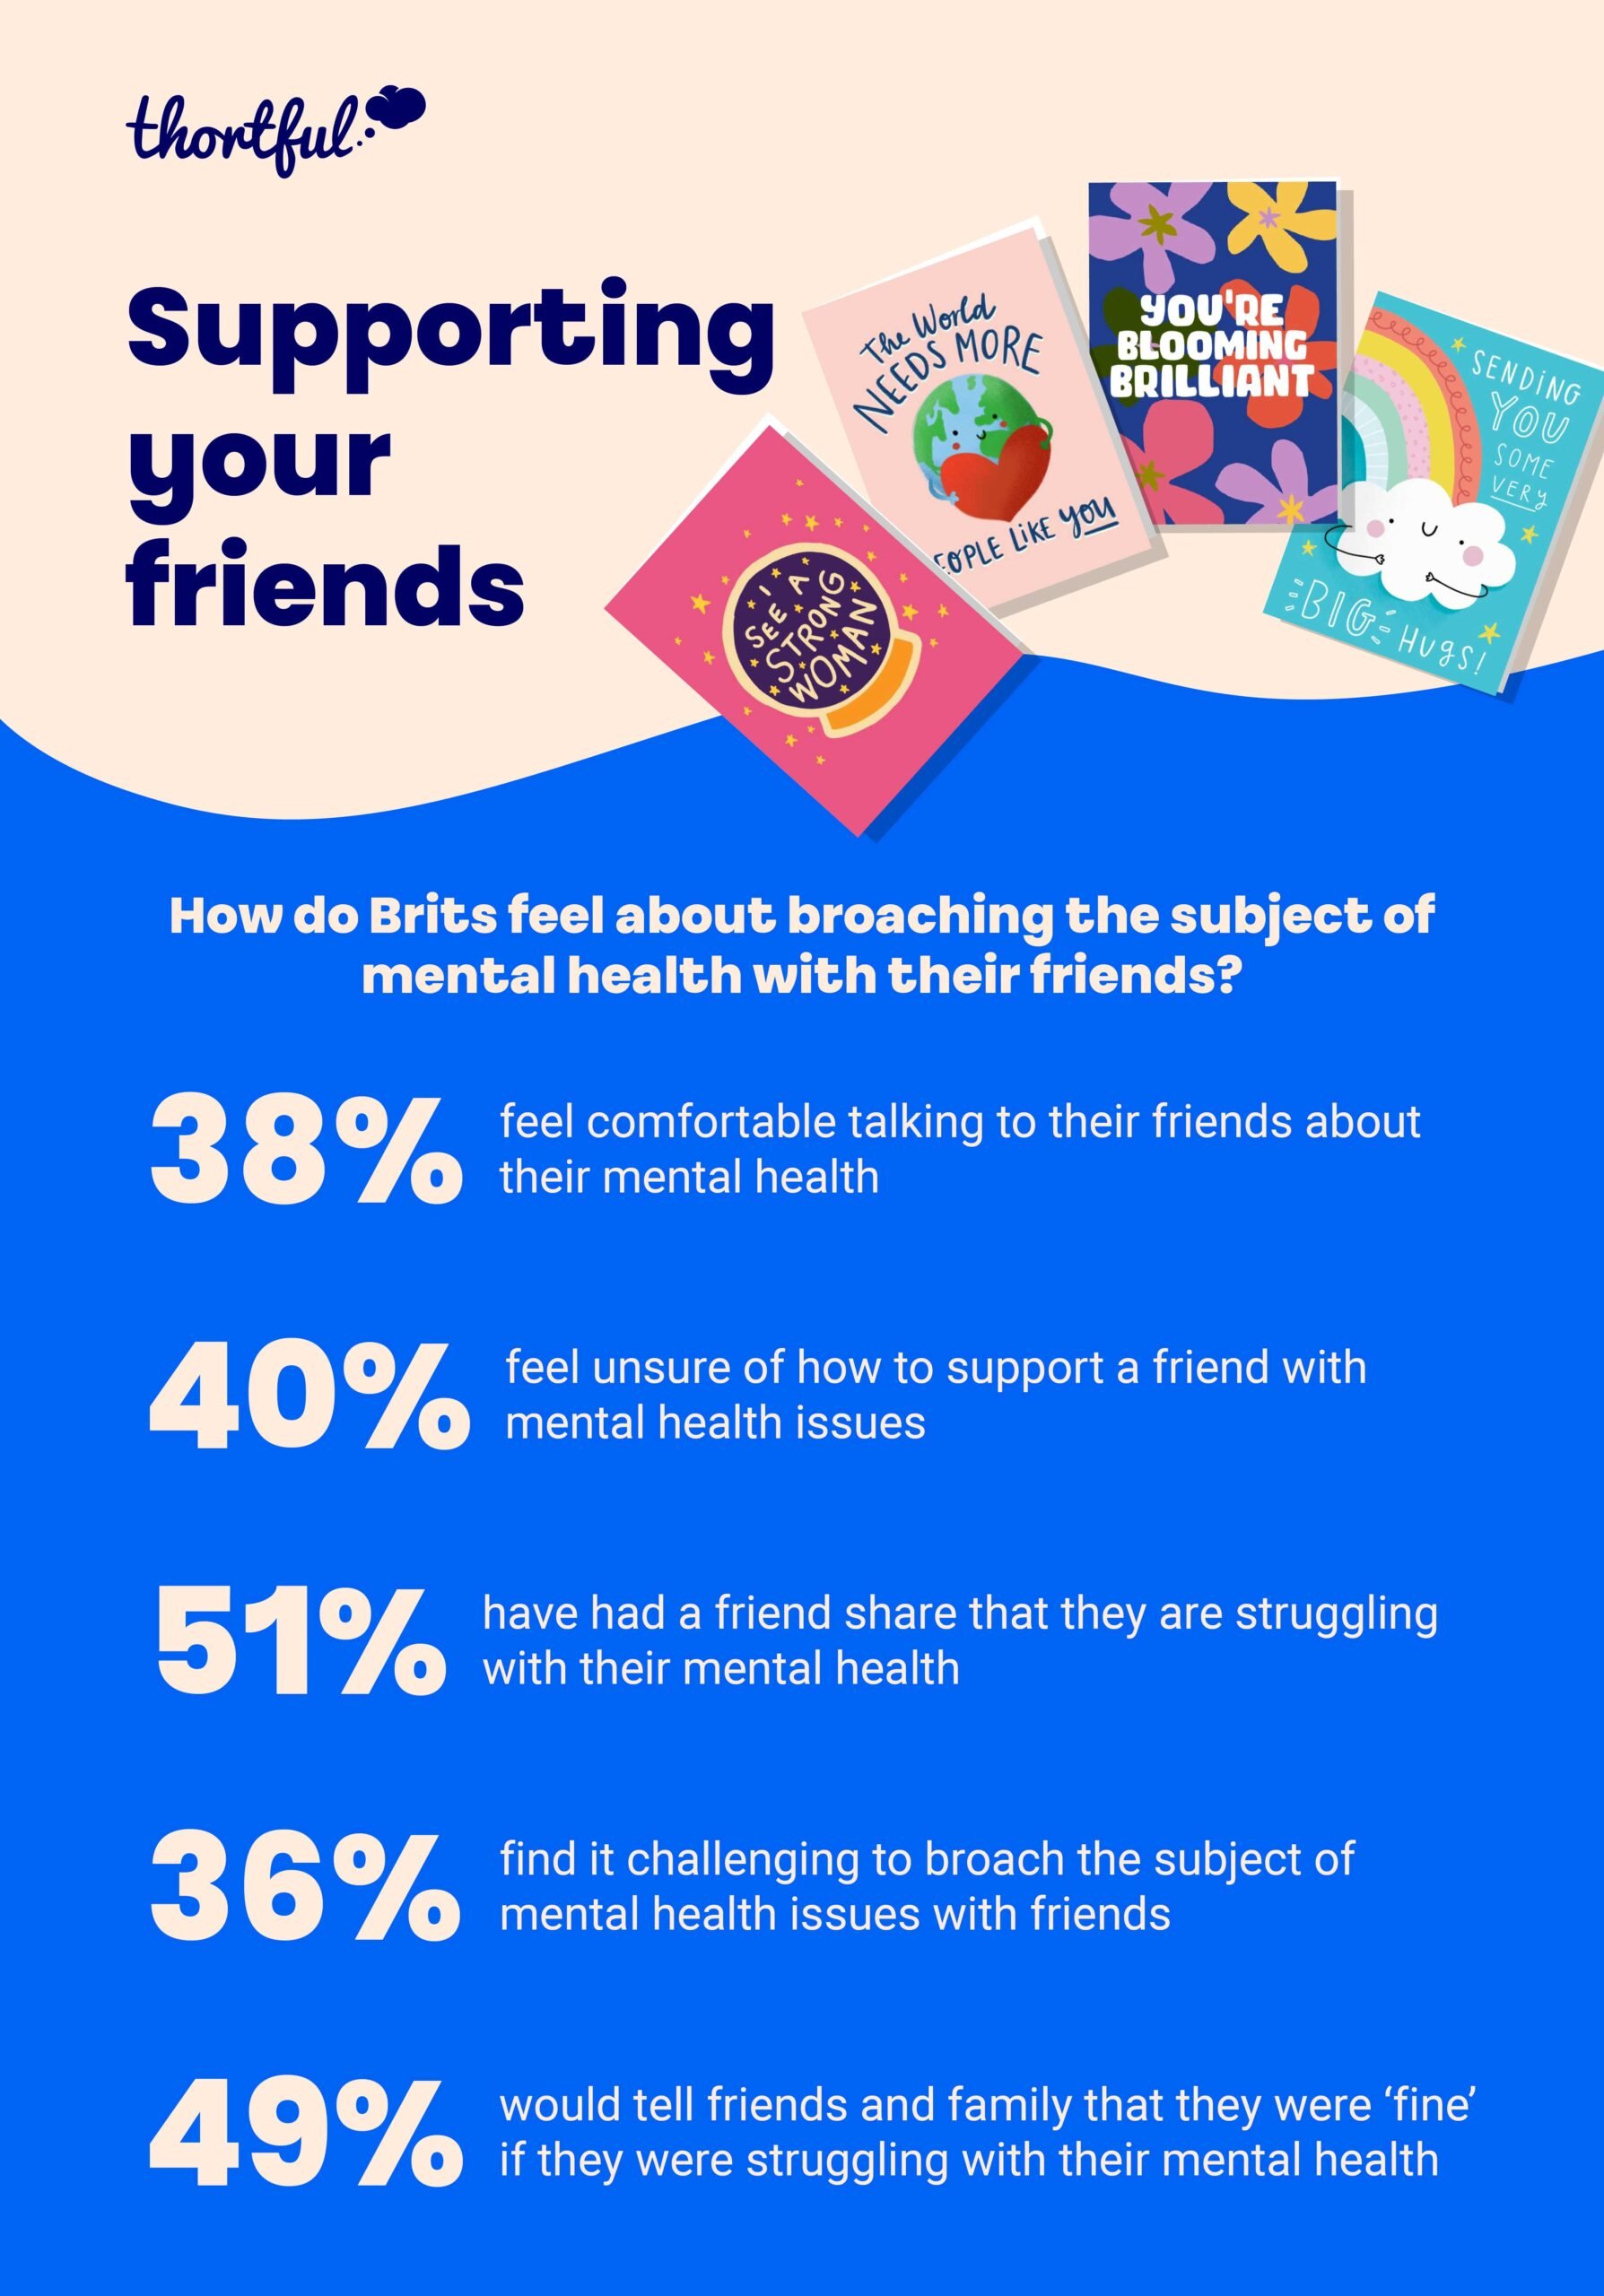 38% of Brits feel uncomfortable talking to their friends about their mental health